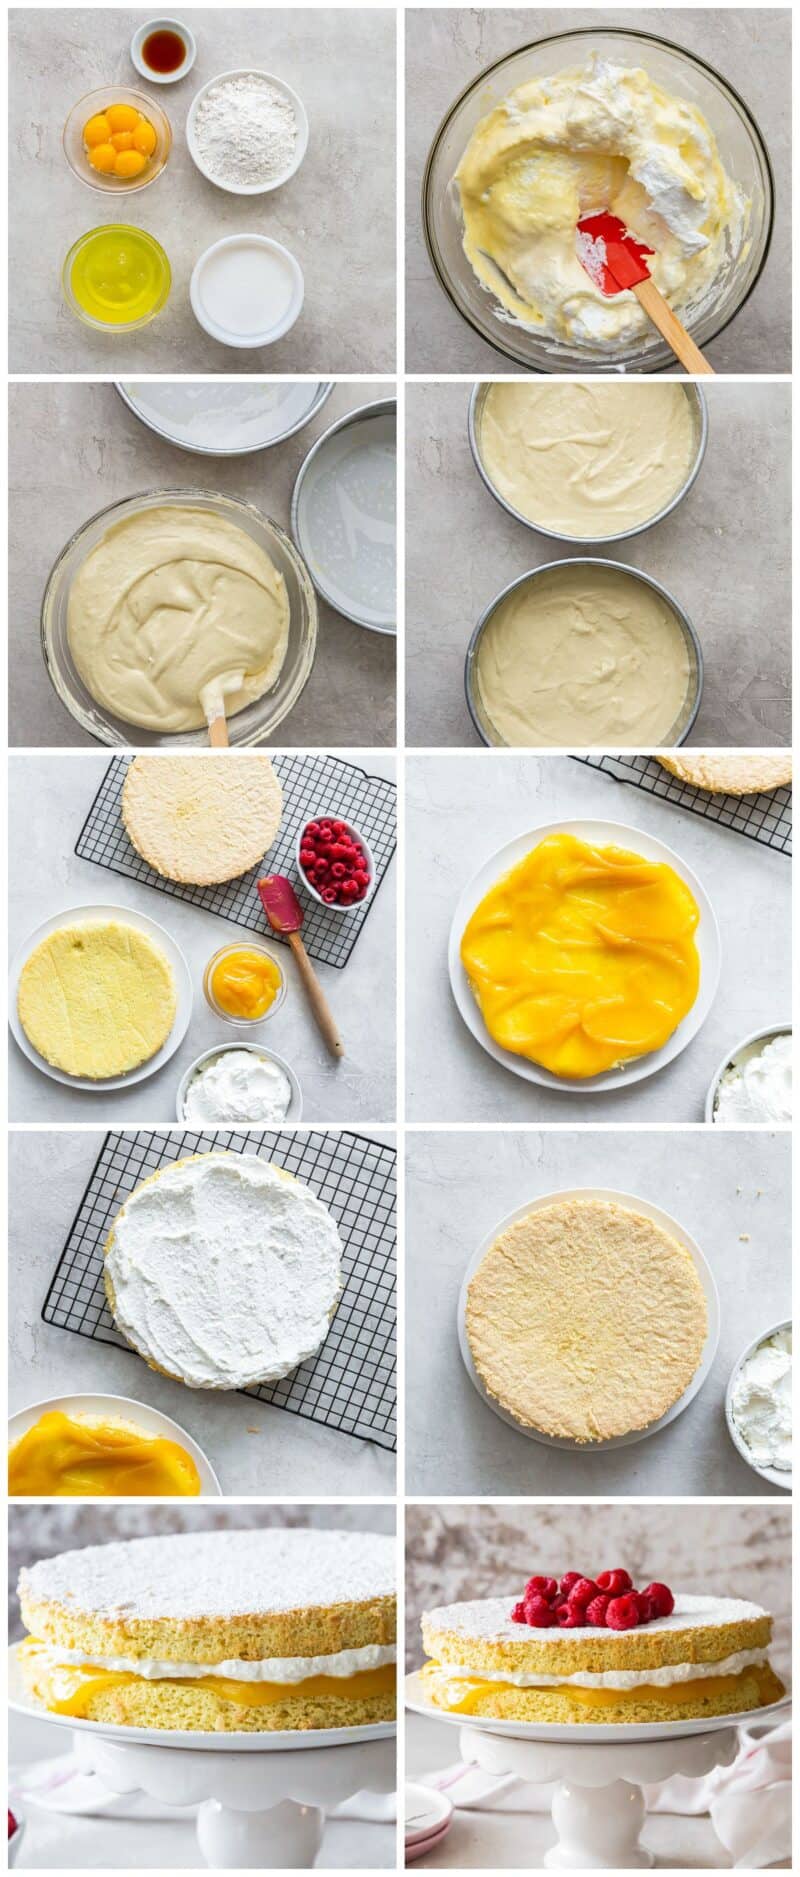 step by step photos for how to make sponge cake